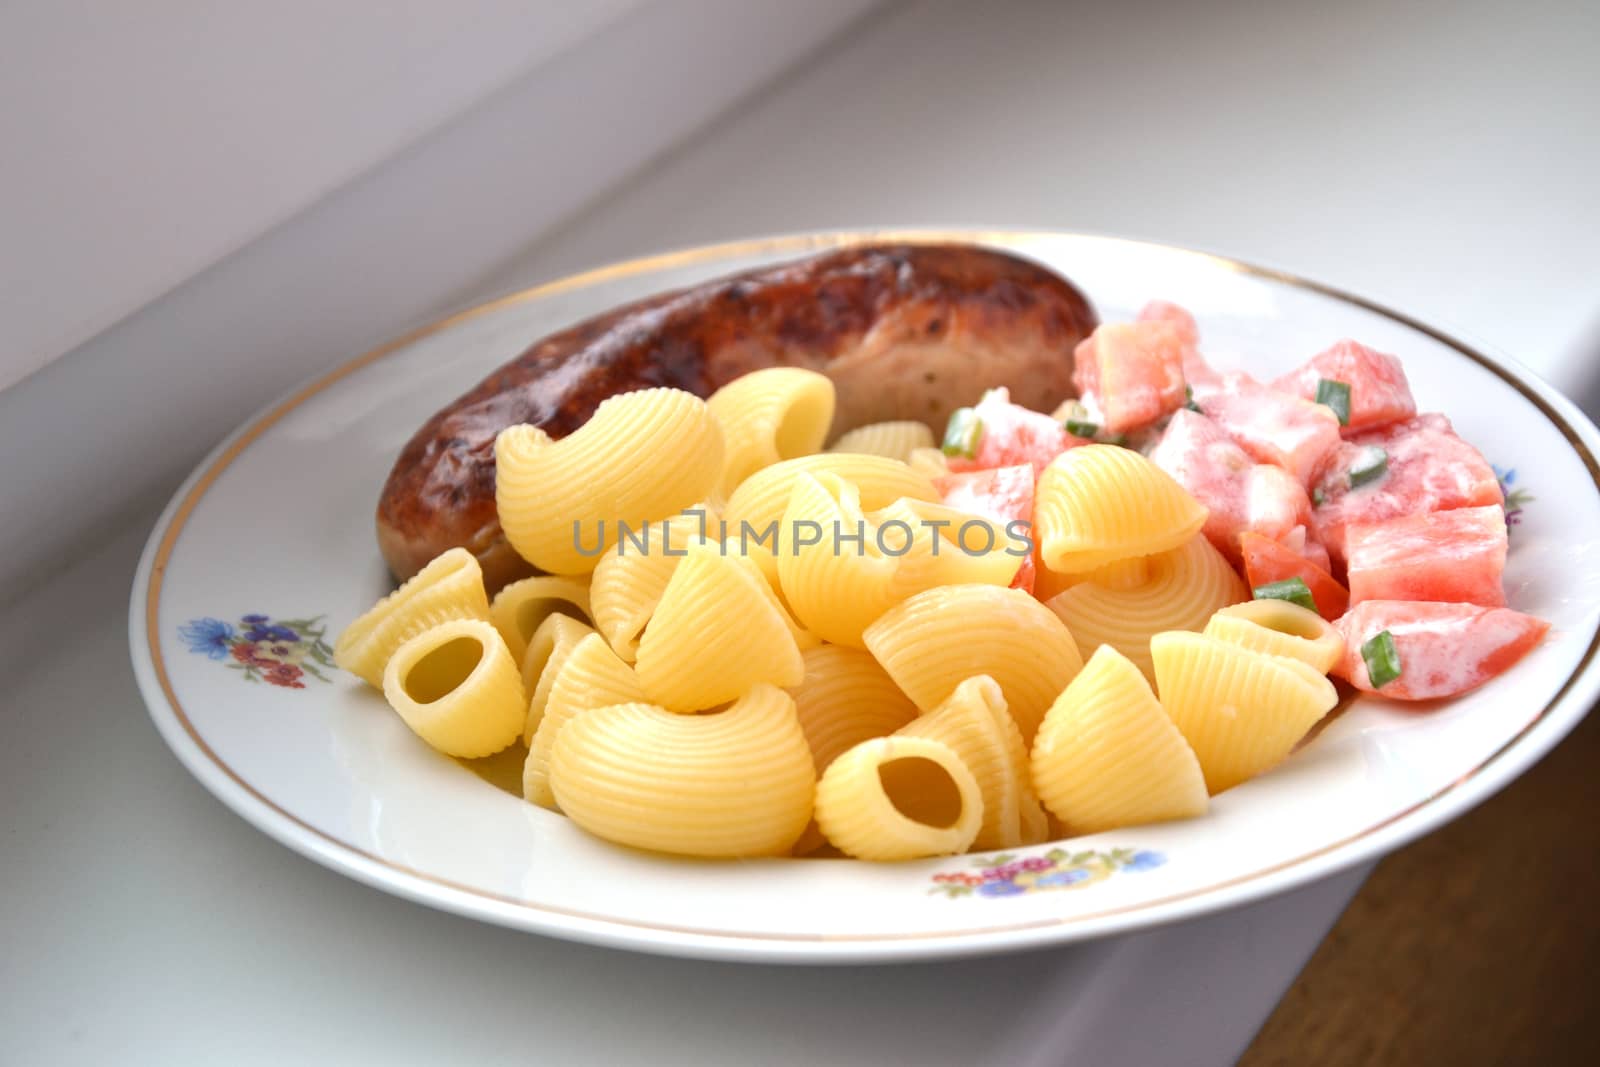 Dish with meat, pasta and tomato by ruv86